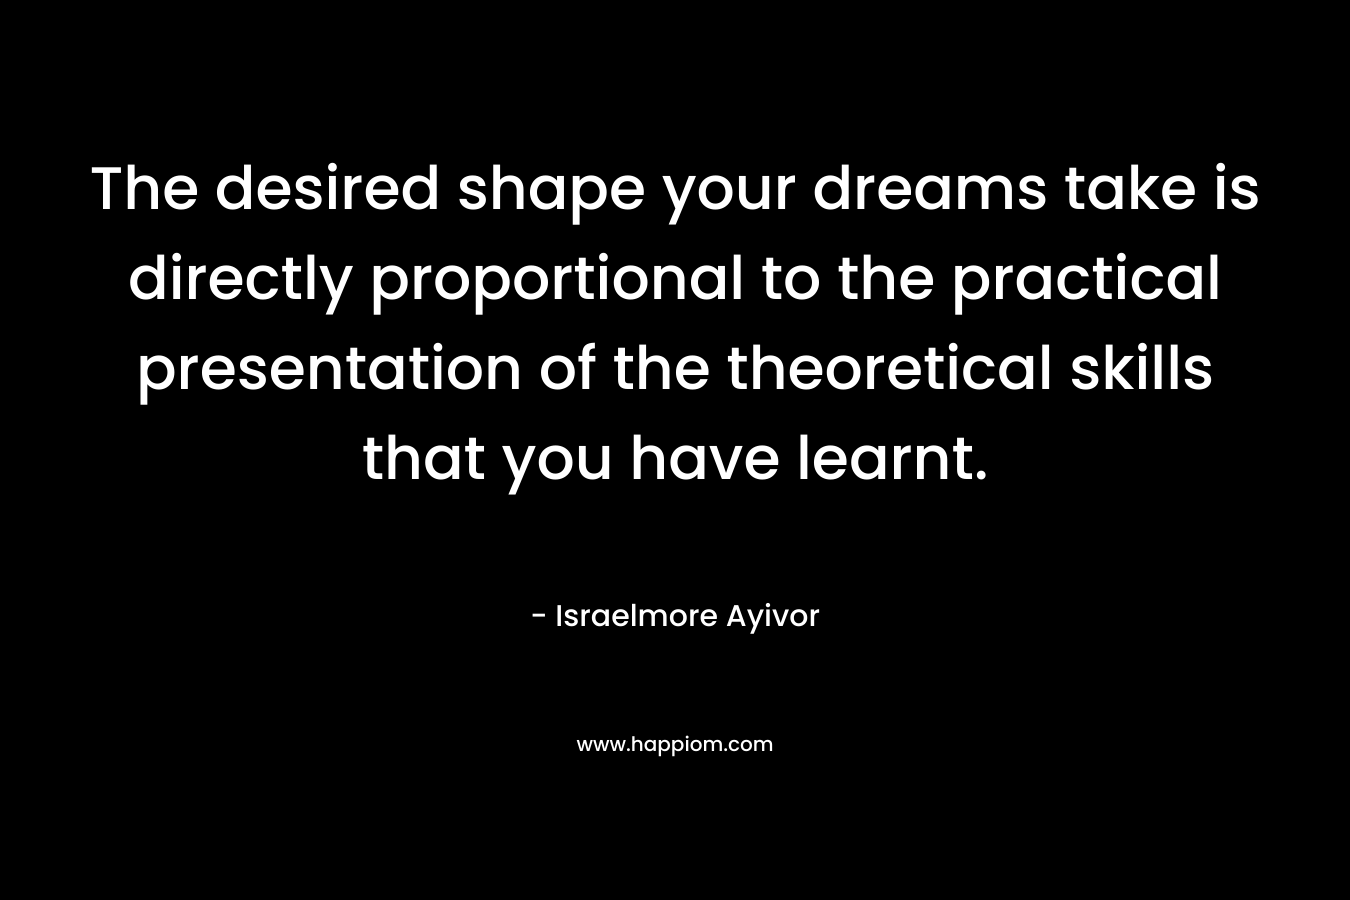 The desired shape your dreams take is directly proportional to the practical presentation of the theoretical skills that you have learnt.